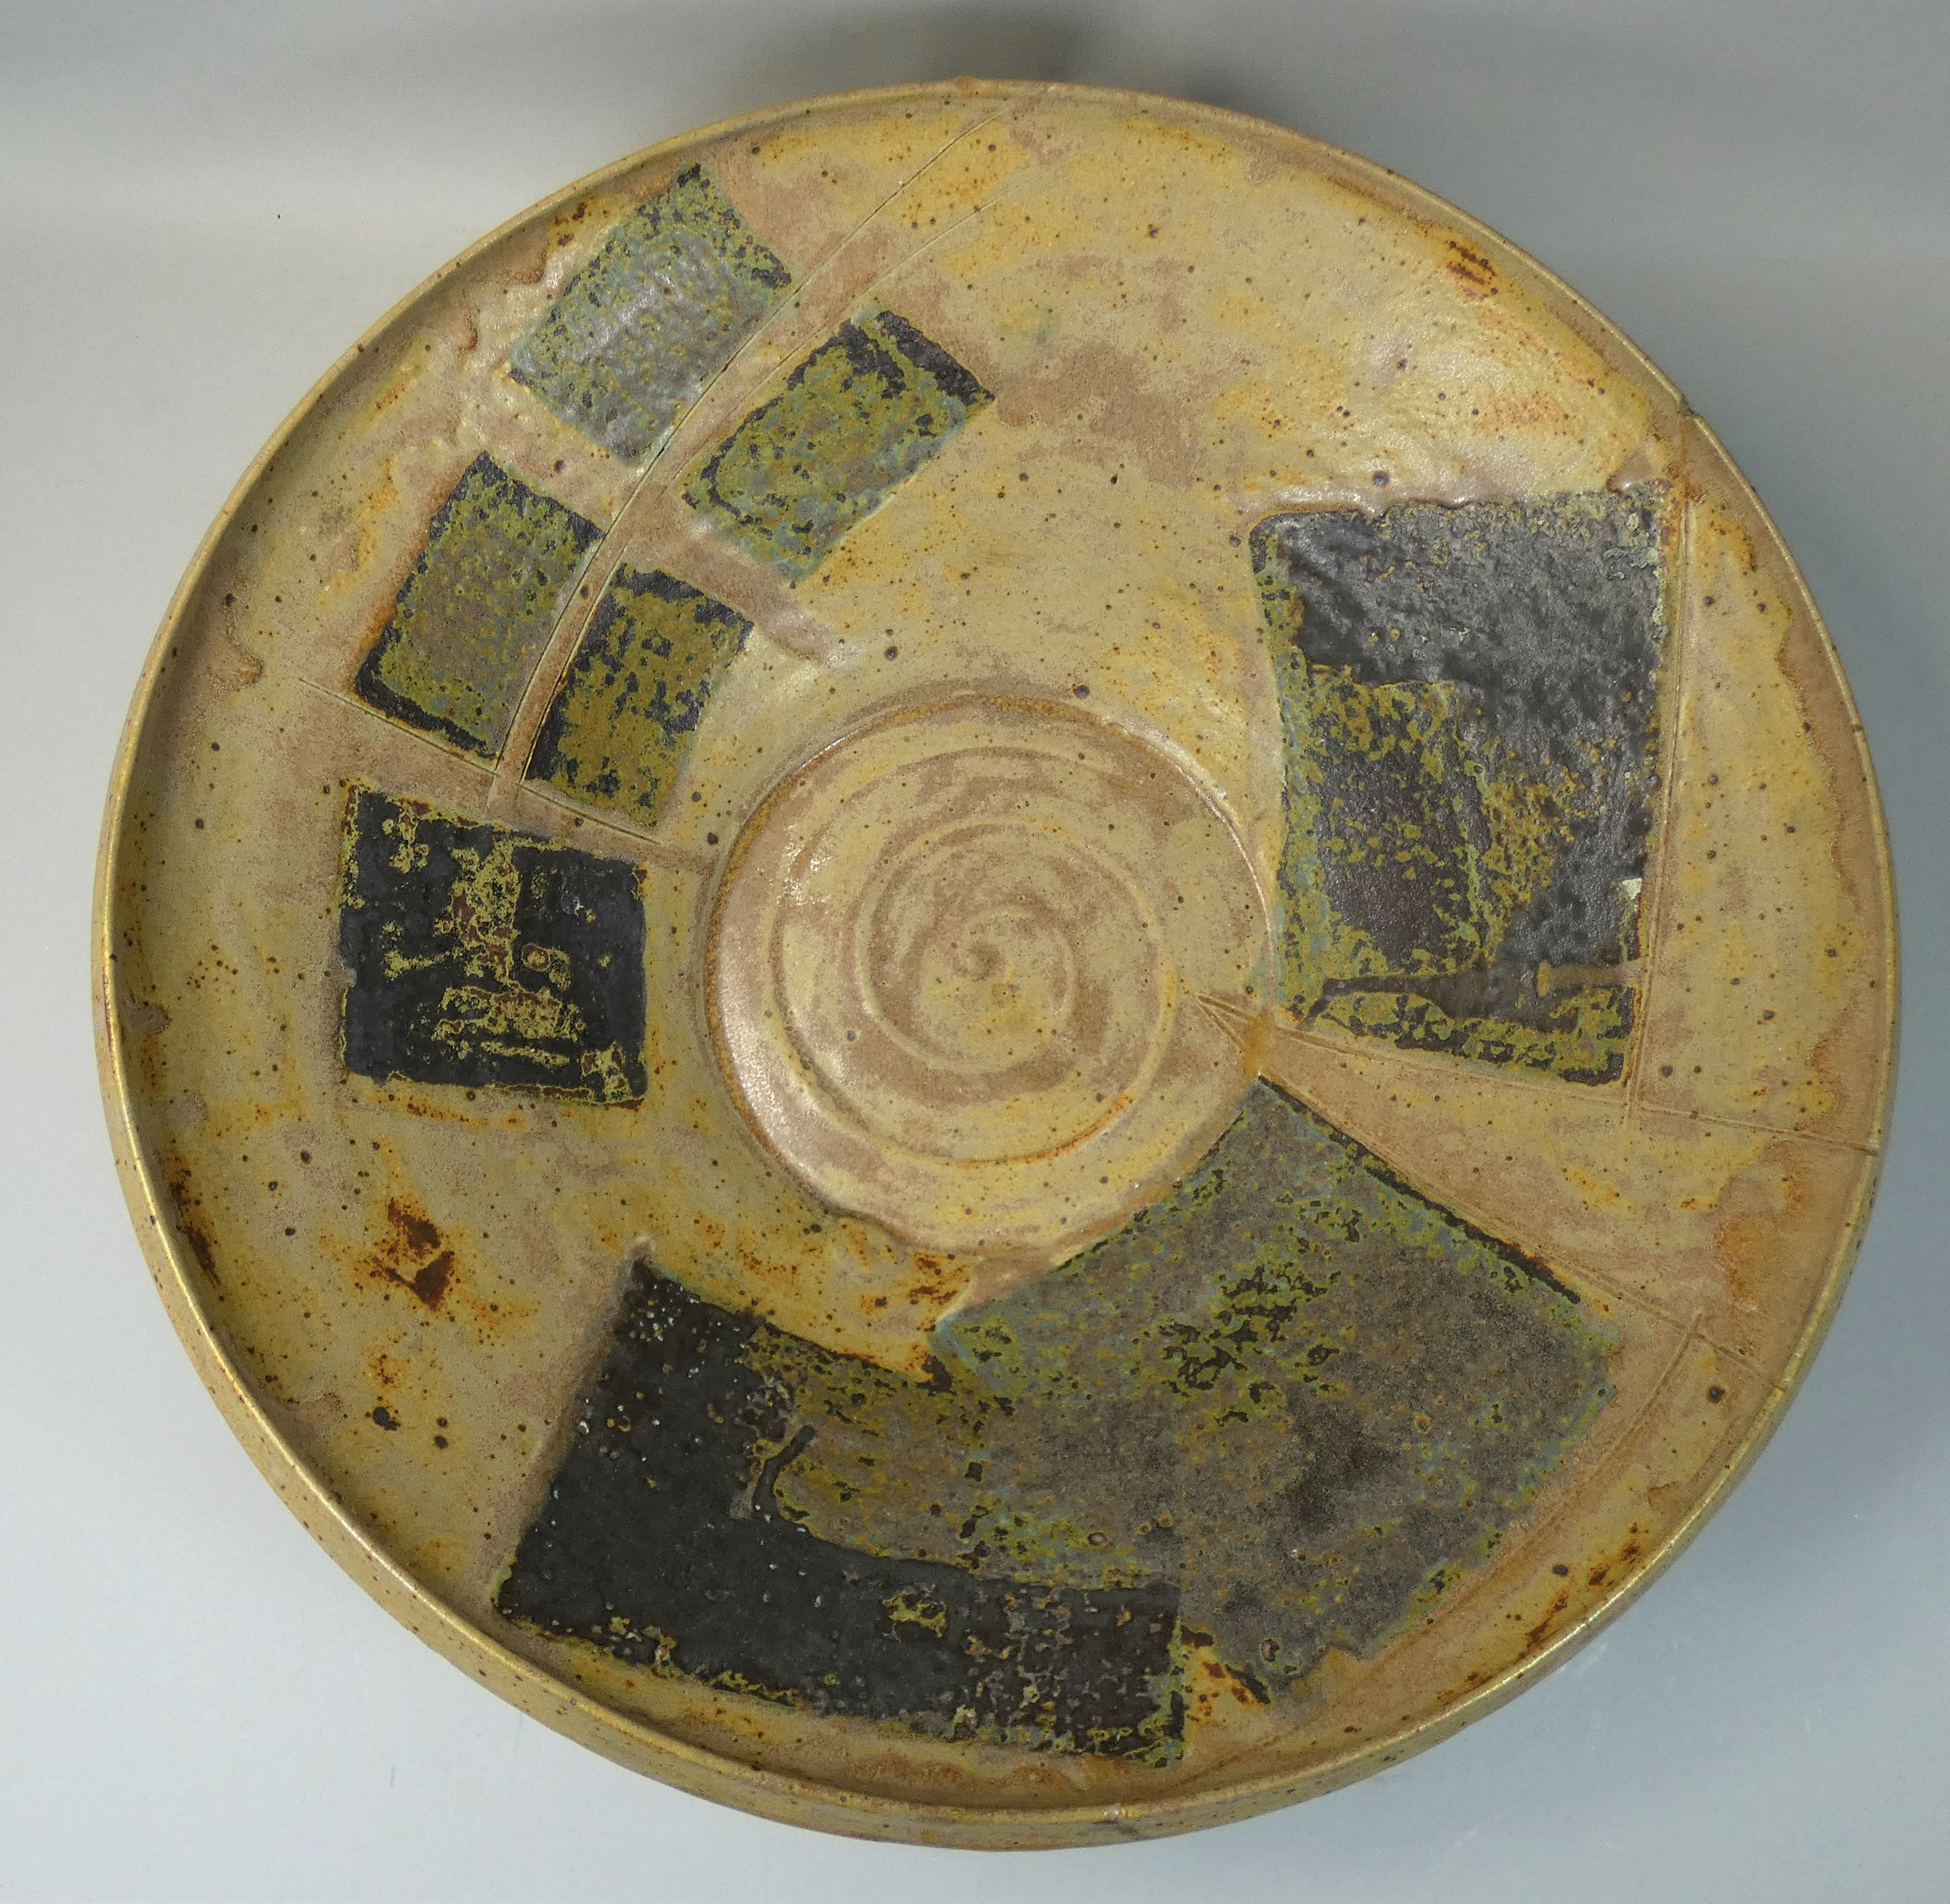 Charles Bound (b.1939), a large stoneware dish with abstract geometric pattern, purchased from the - Image 2 of 4